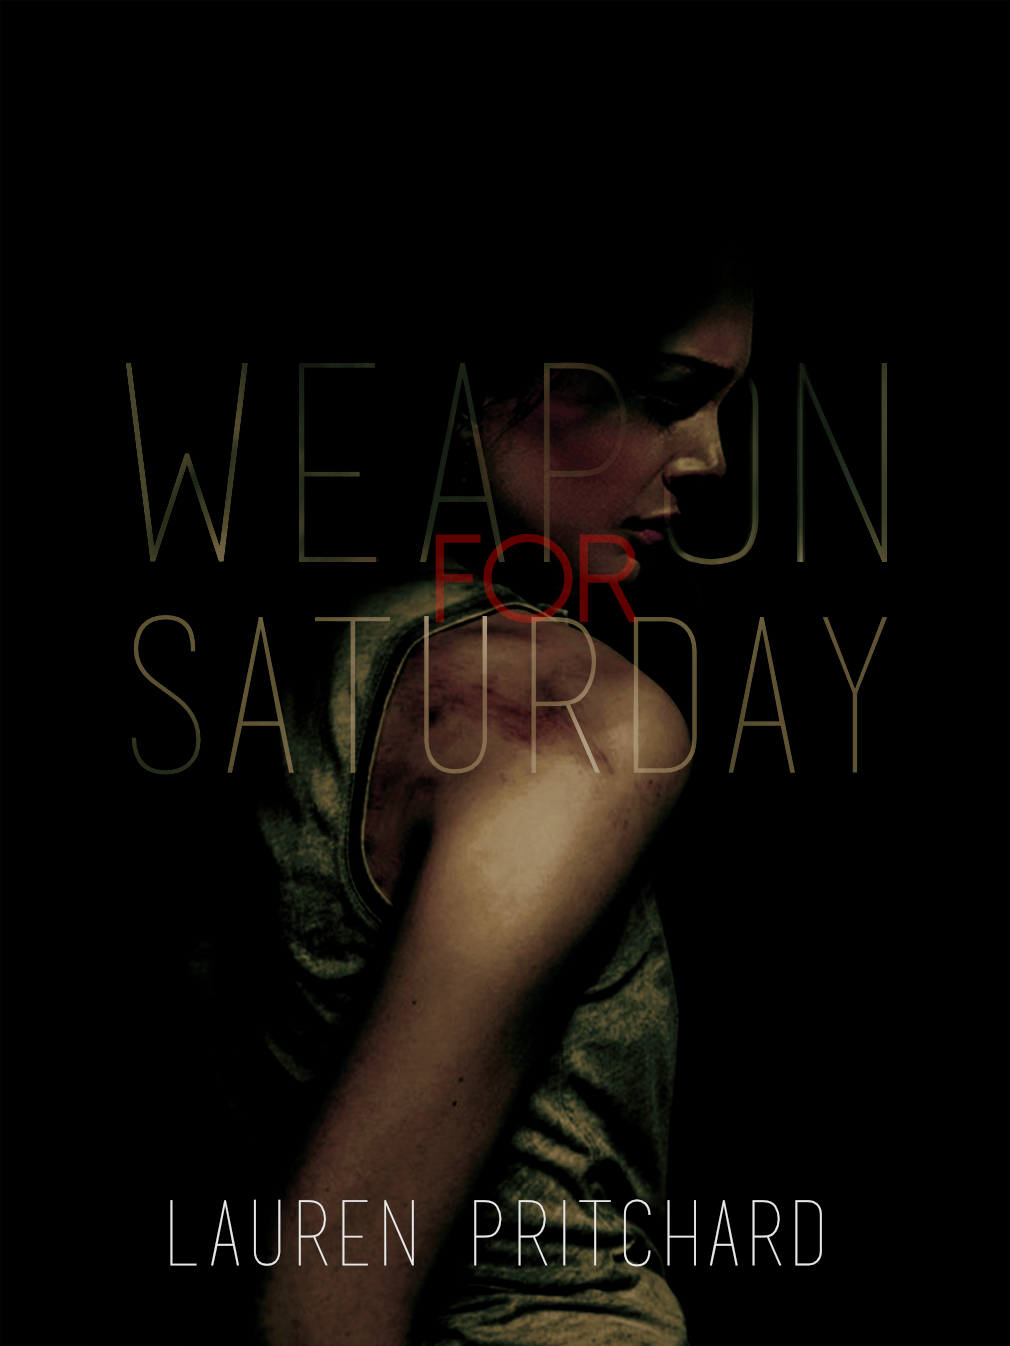 A book cover with a woman shrouded in darkness. The title reads "Weapon for Saturday".